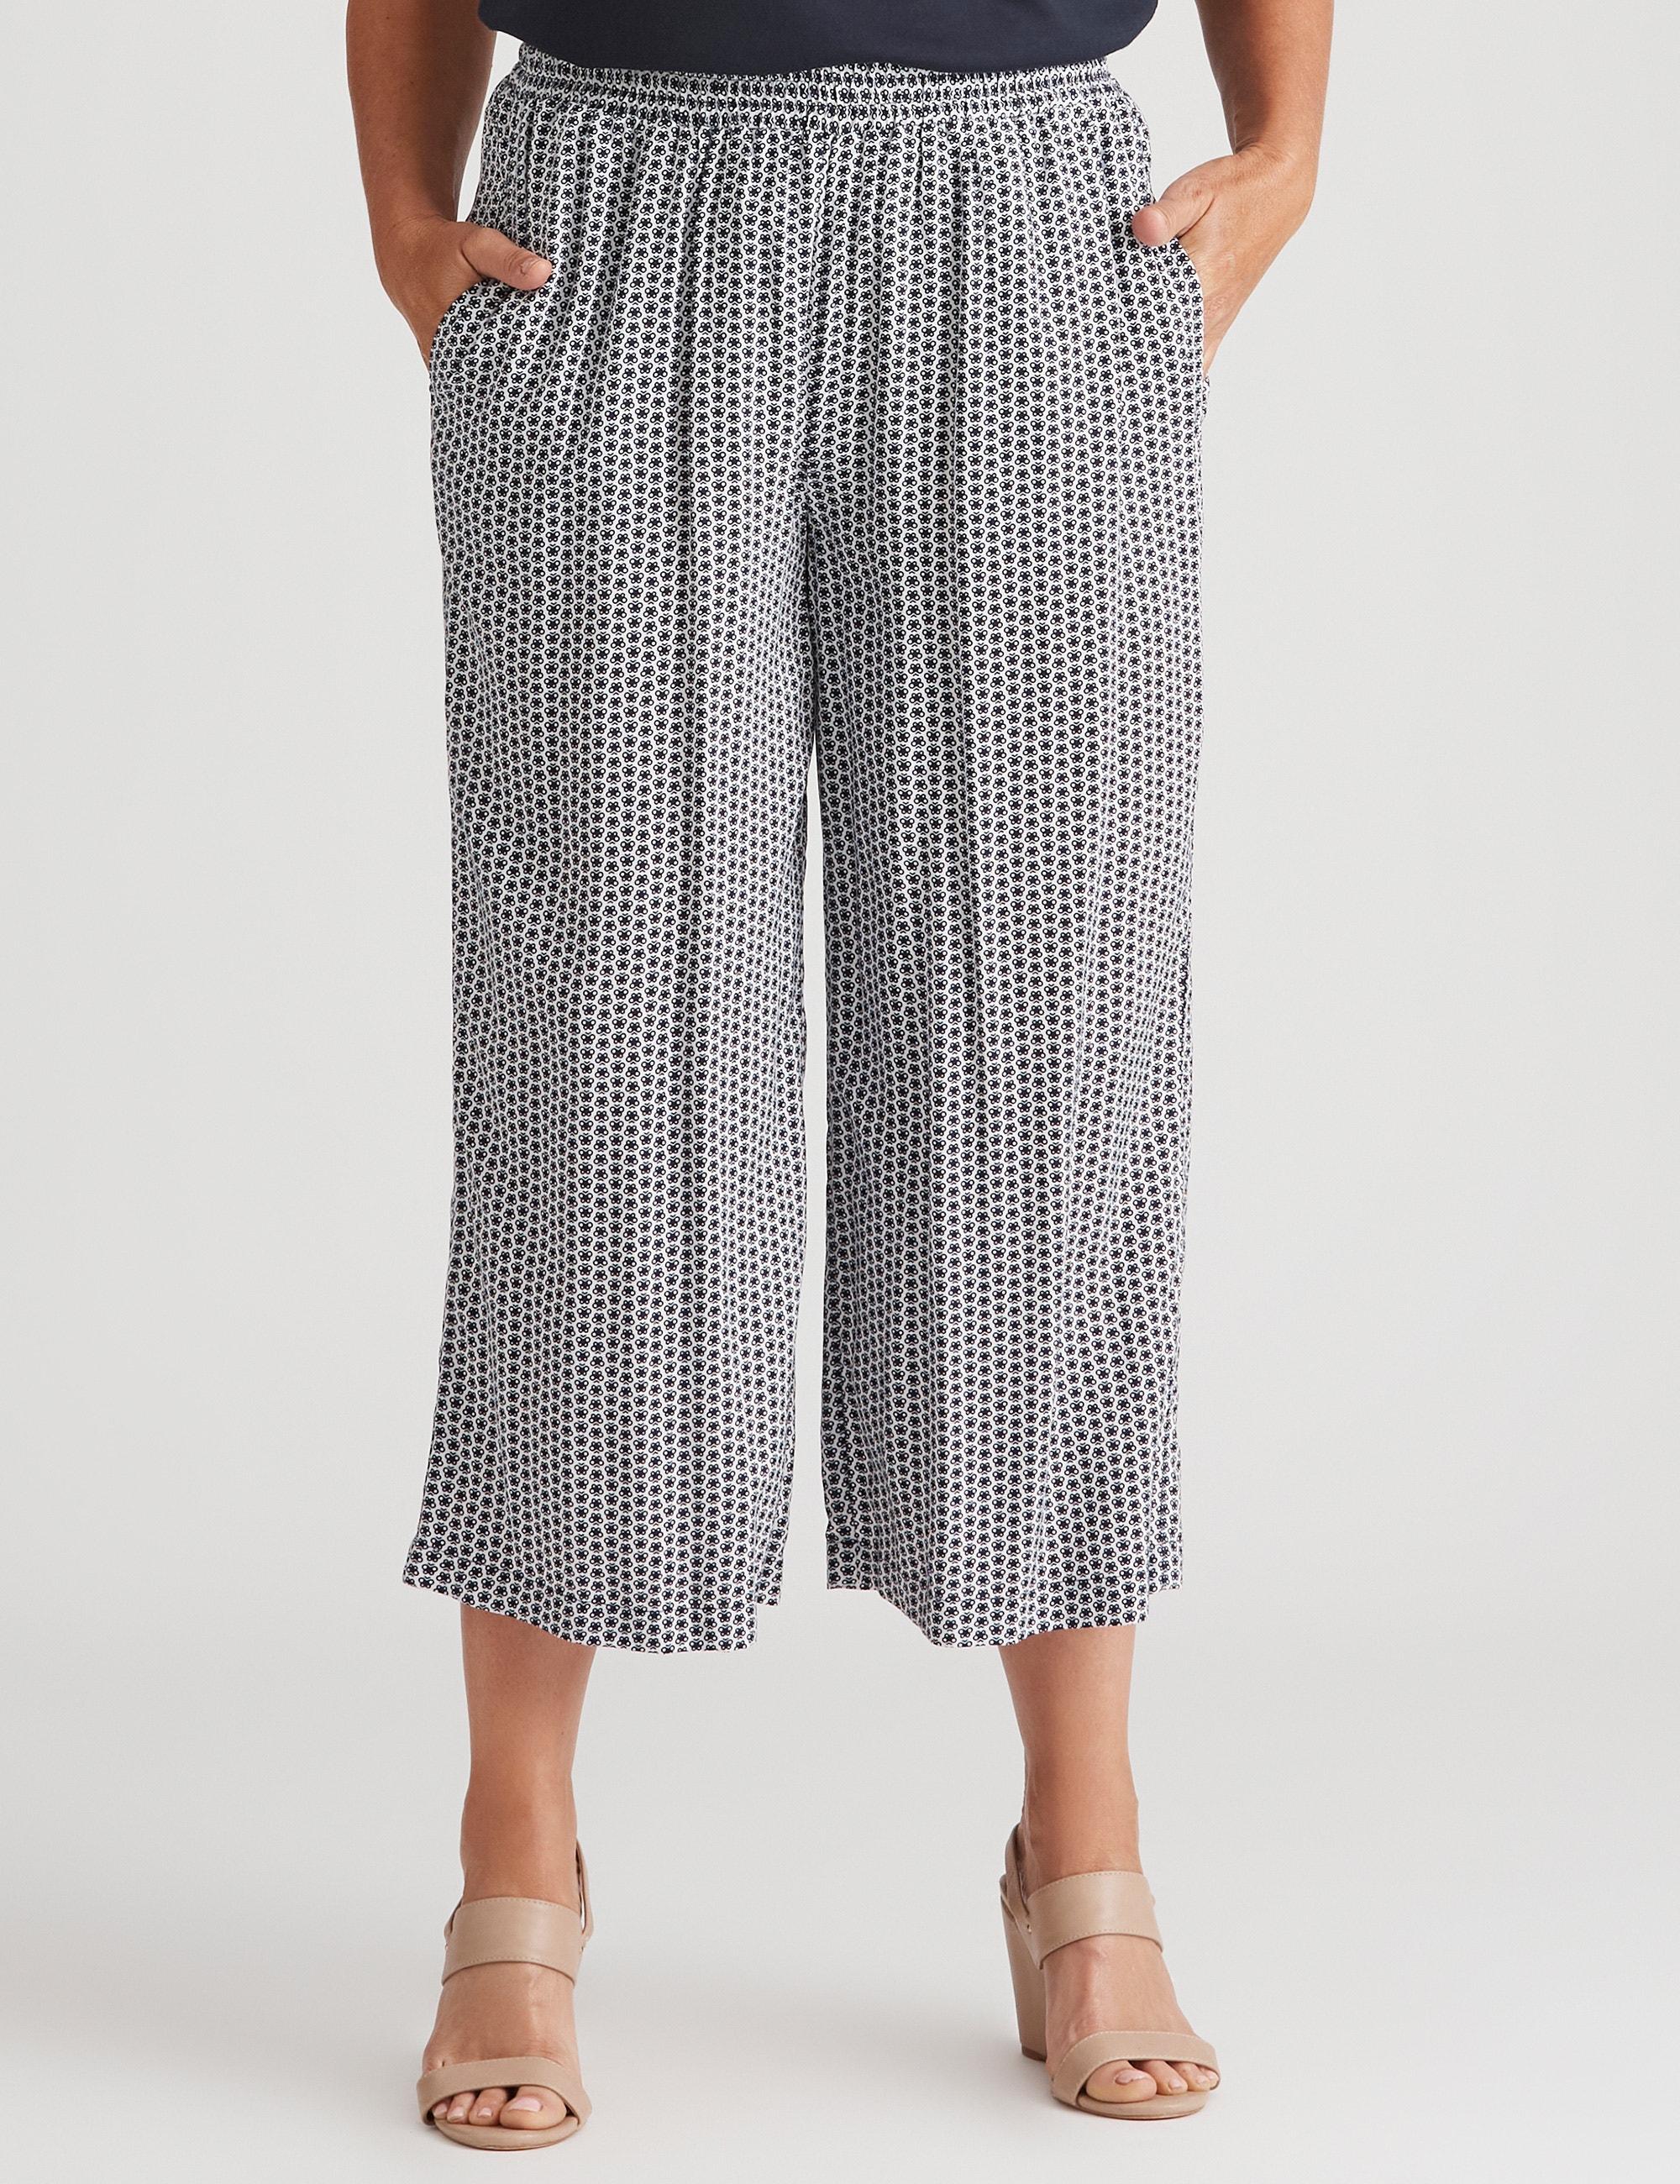 MILLERS - Womens Pants - White Summer Cropped - Wide Leg - Fashion Trousers - Abstract Butterfly - High Waist - Casual Work Clothes - Office Wear